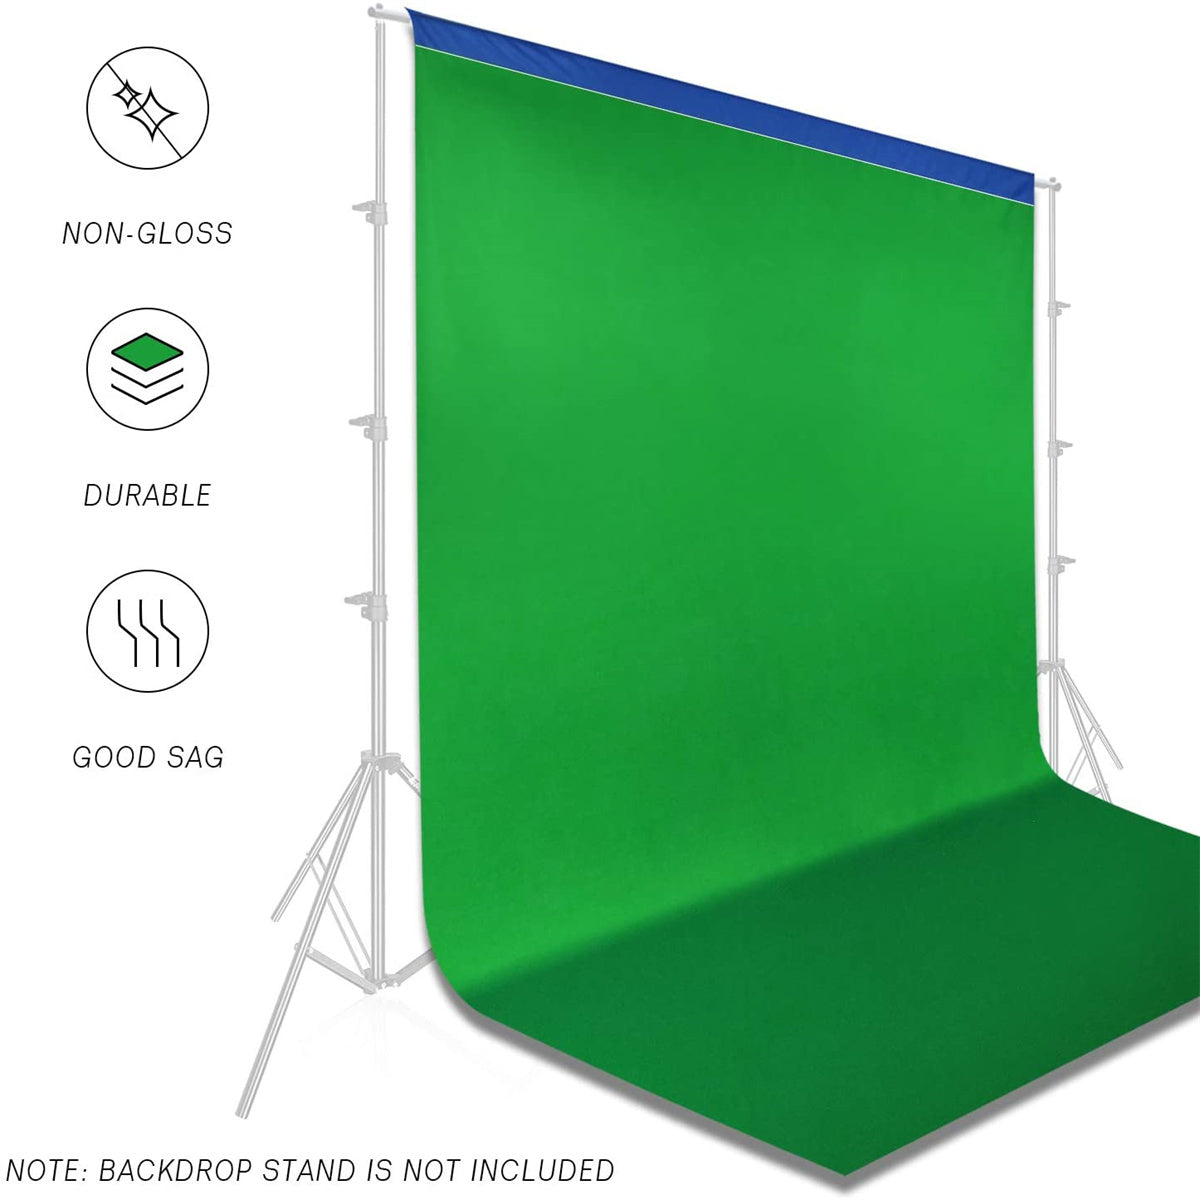 EMART 2-in-1 Black/White ,Green/Blue 6 x 9 ft Photo Backdrop, Wrinkle-Free Polyester-Cotton Background - EMART INTERNATIONAL, INC (Official Website)